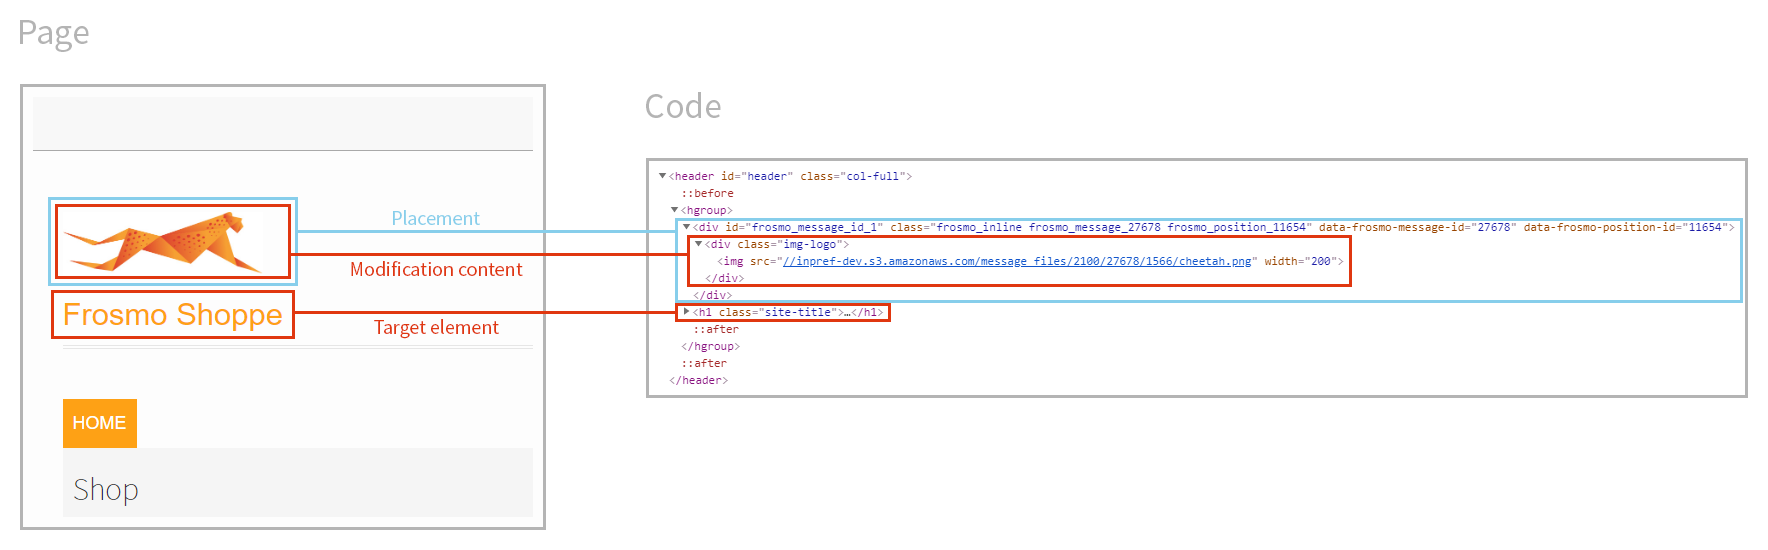 Placement and modification content in the page code vs. on the page